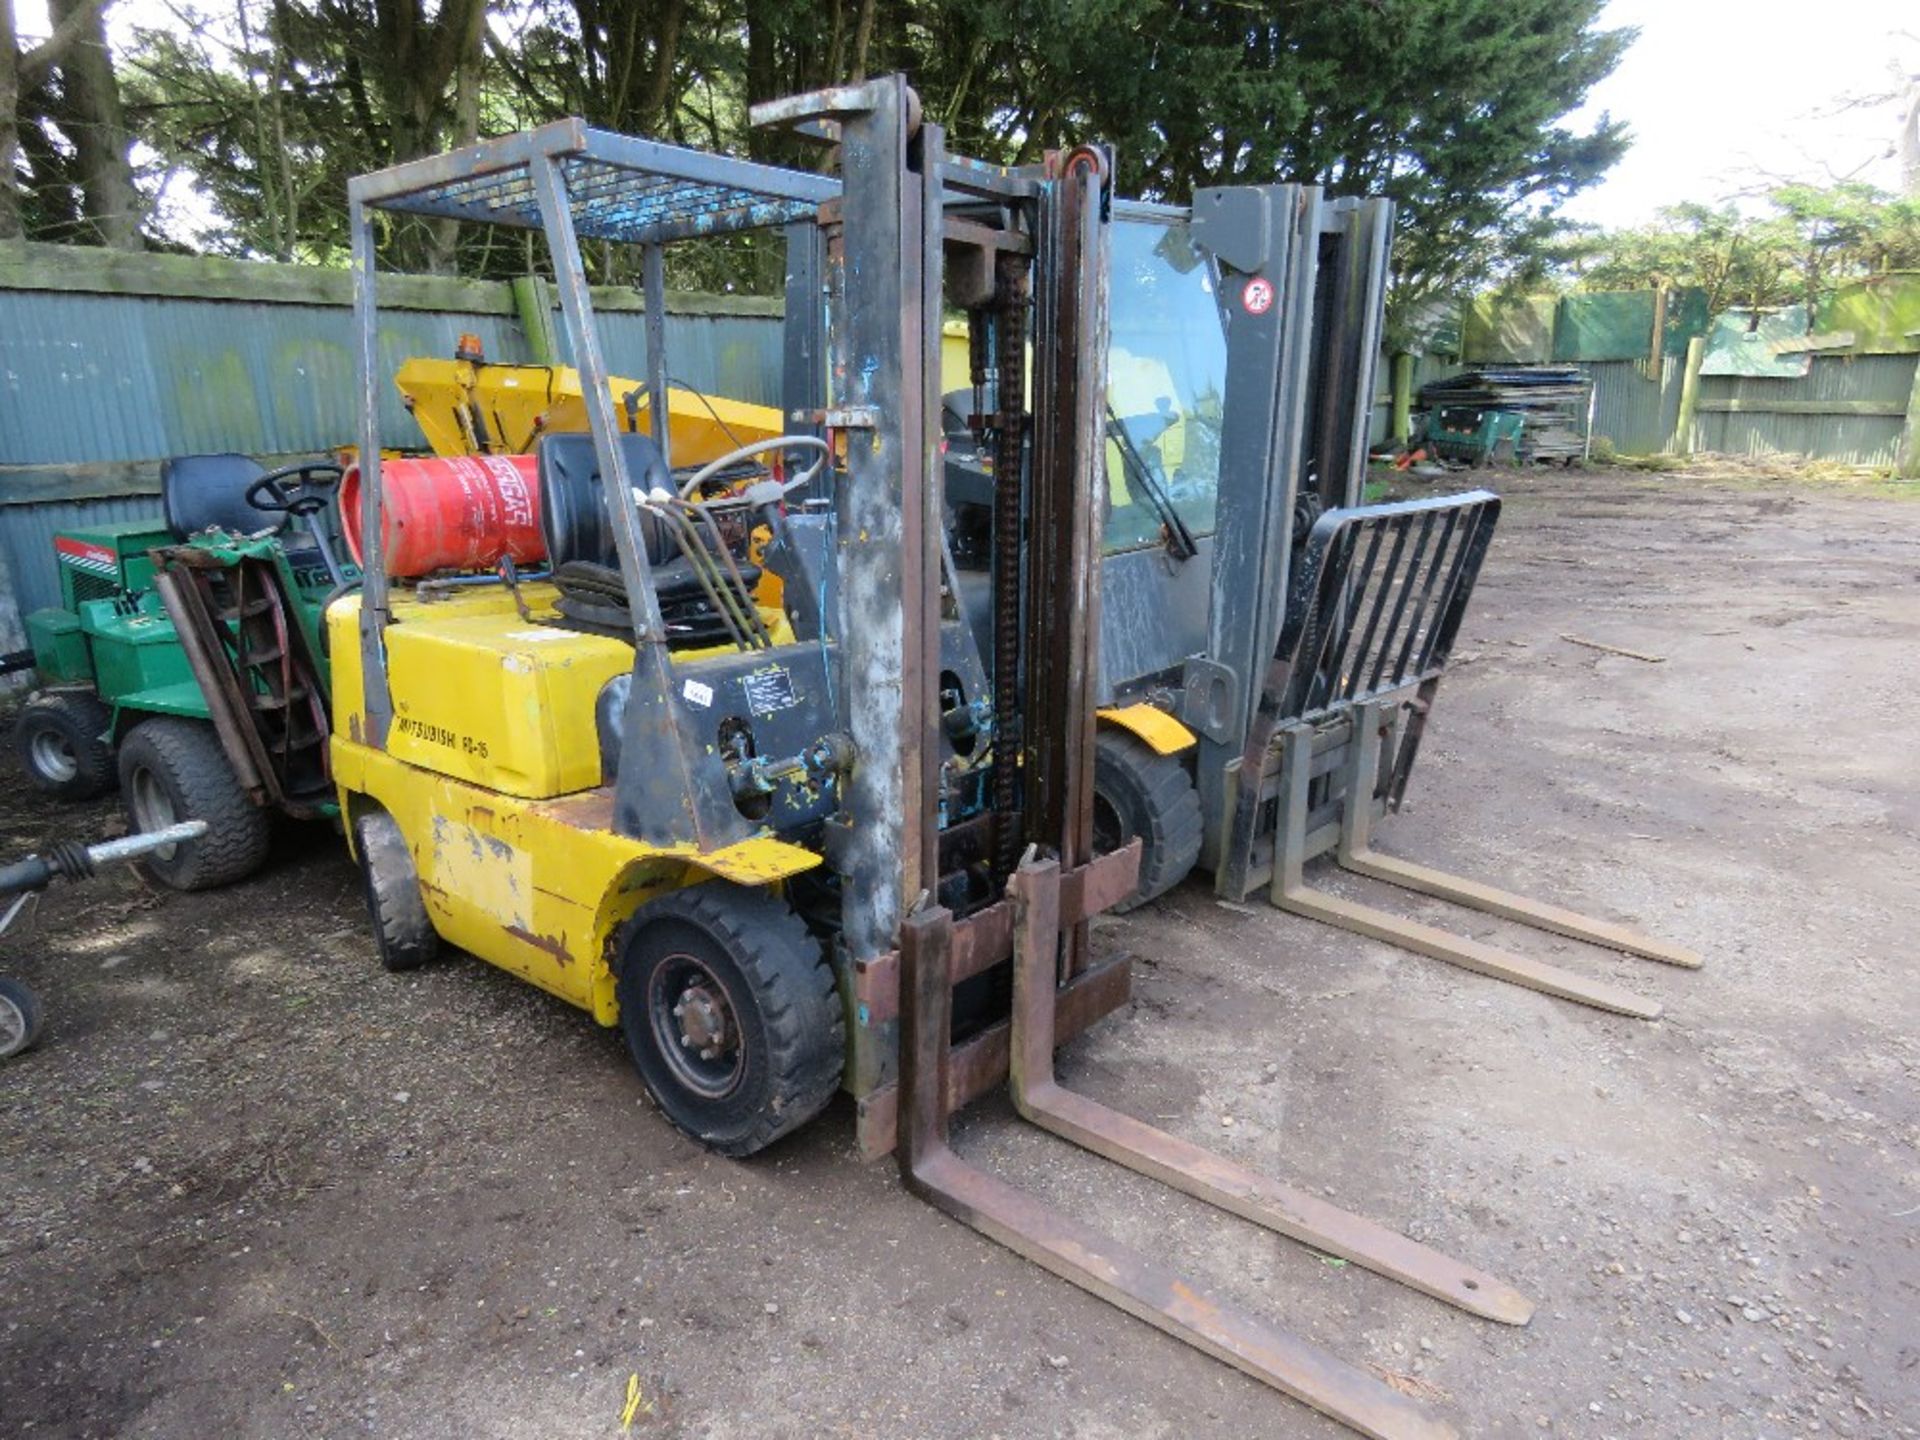 MITSUBISHI FG15 GAS POWERED FORKLIFT. WHEN TESTED WAS SEEN TO START AND RUN BRIEFLY BUT CUTTING OUT.